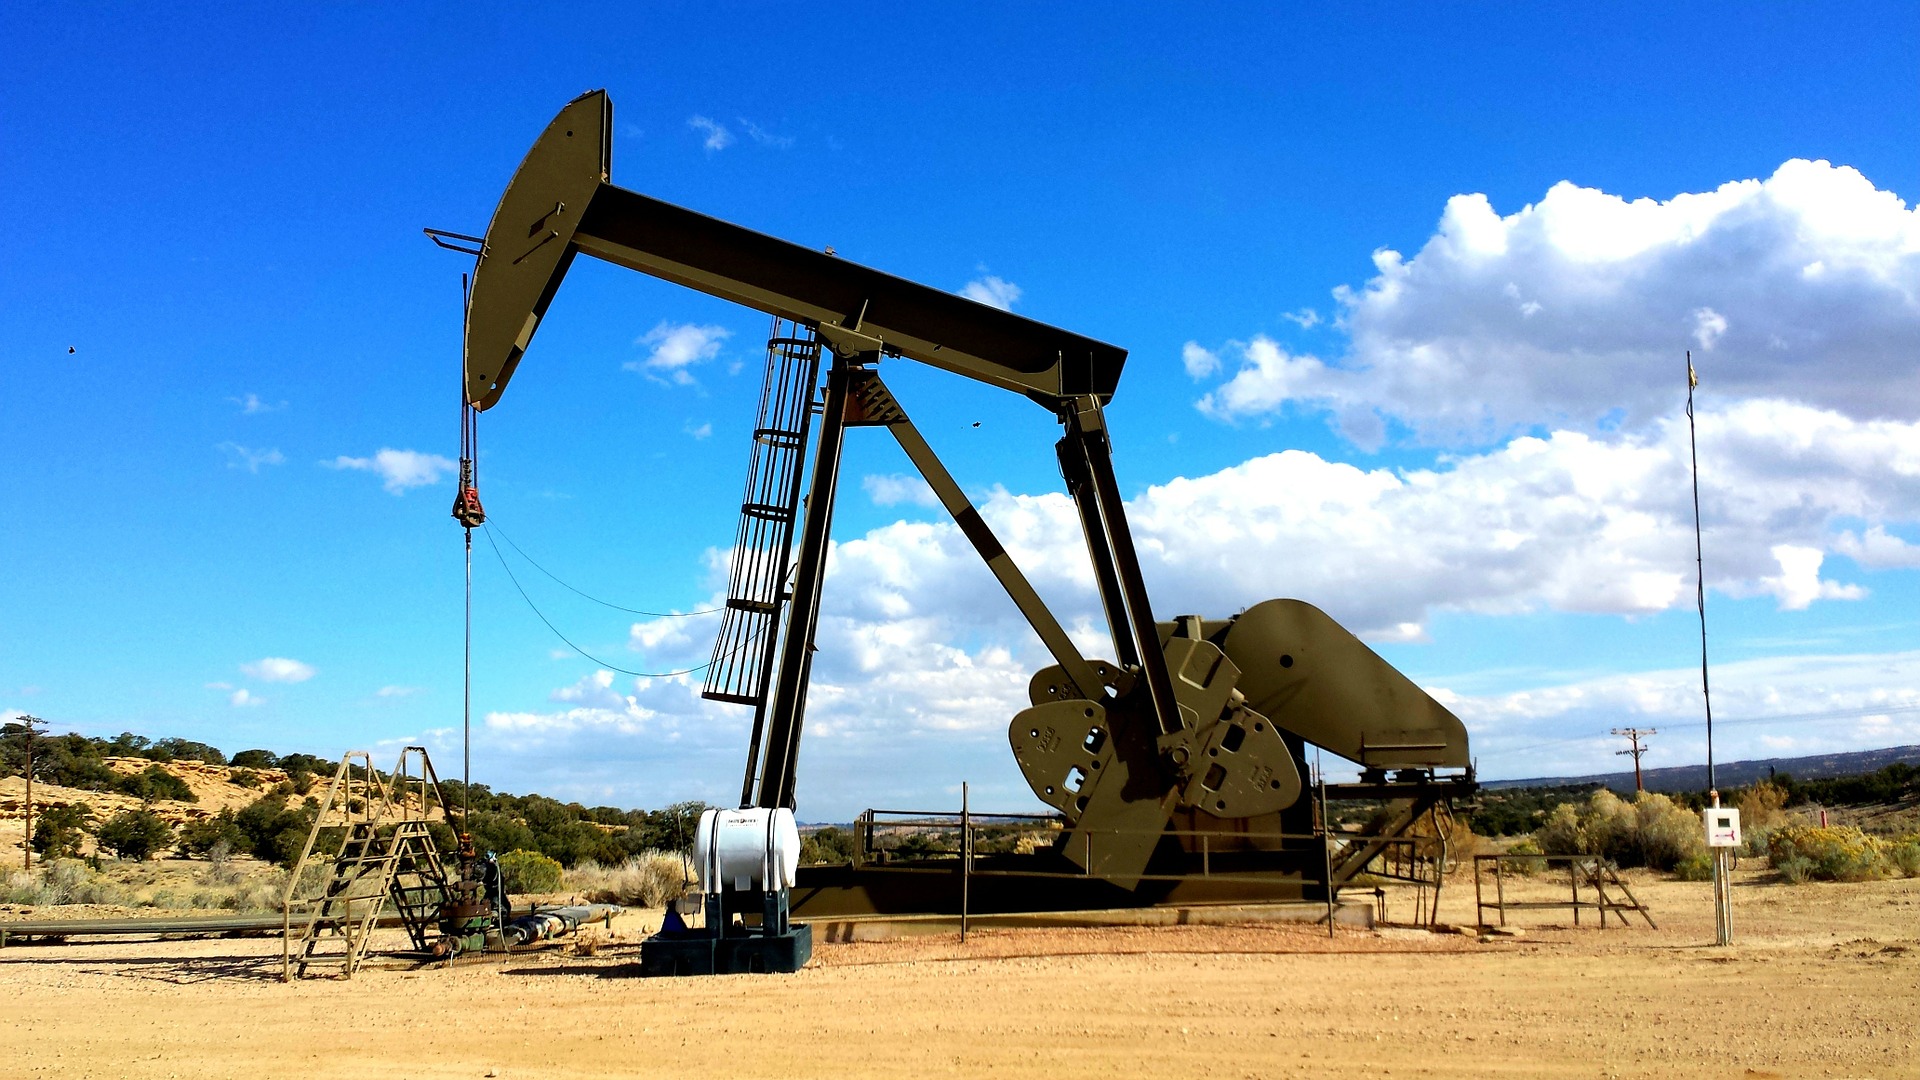 Combating misinformation on oil and gas leases versus permits